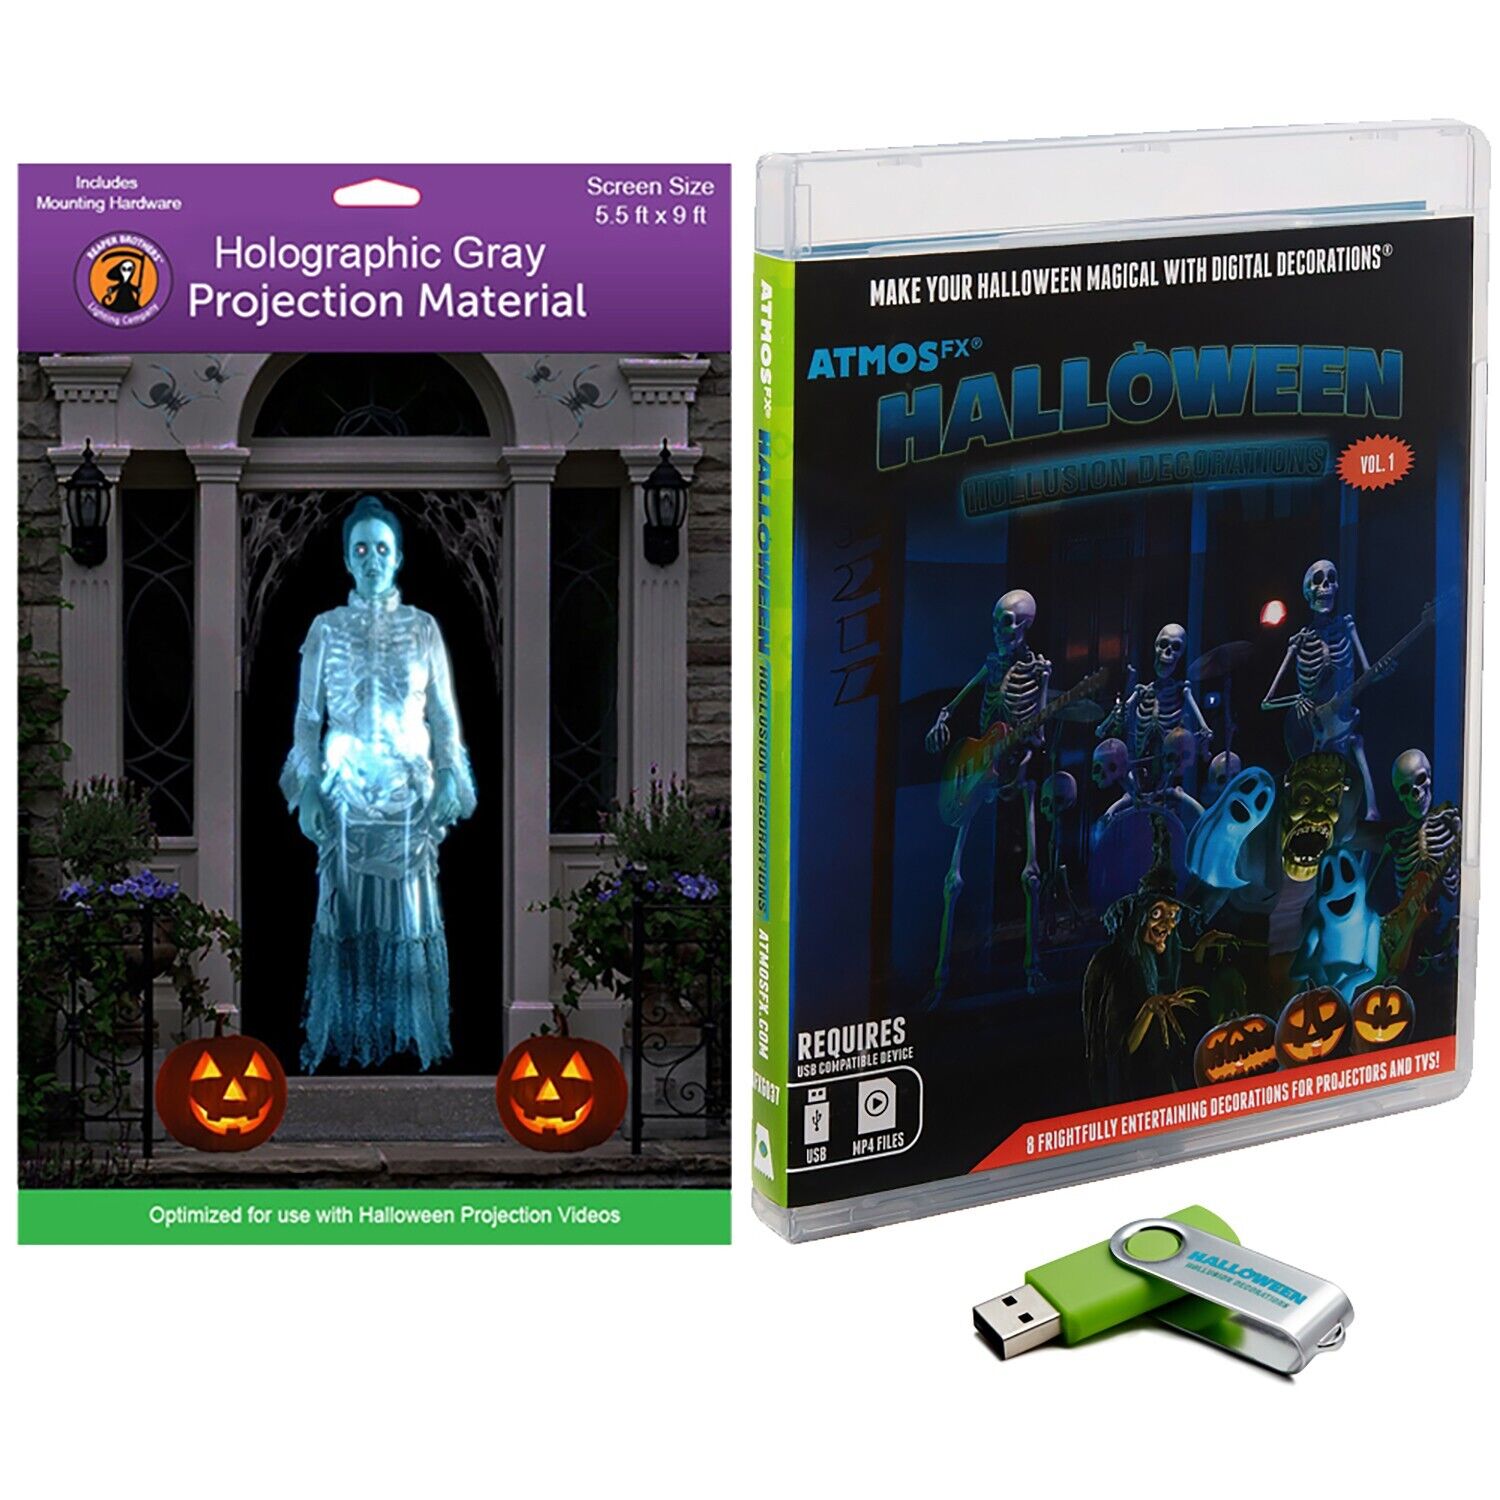 AtmosFX Halloween Hollusion Digital Decoration Kit - Videos & Screen Included